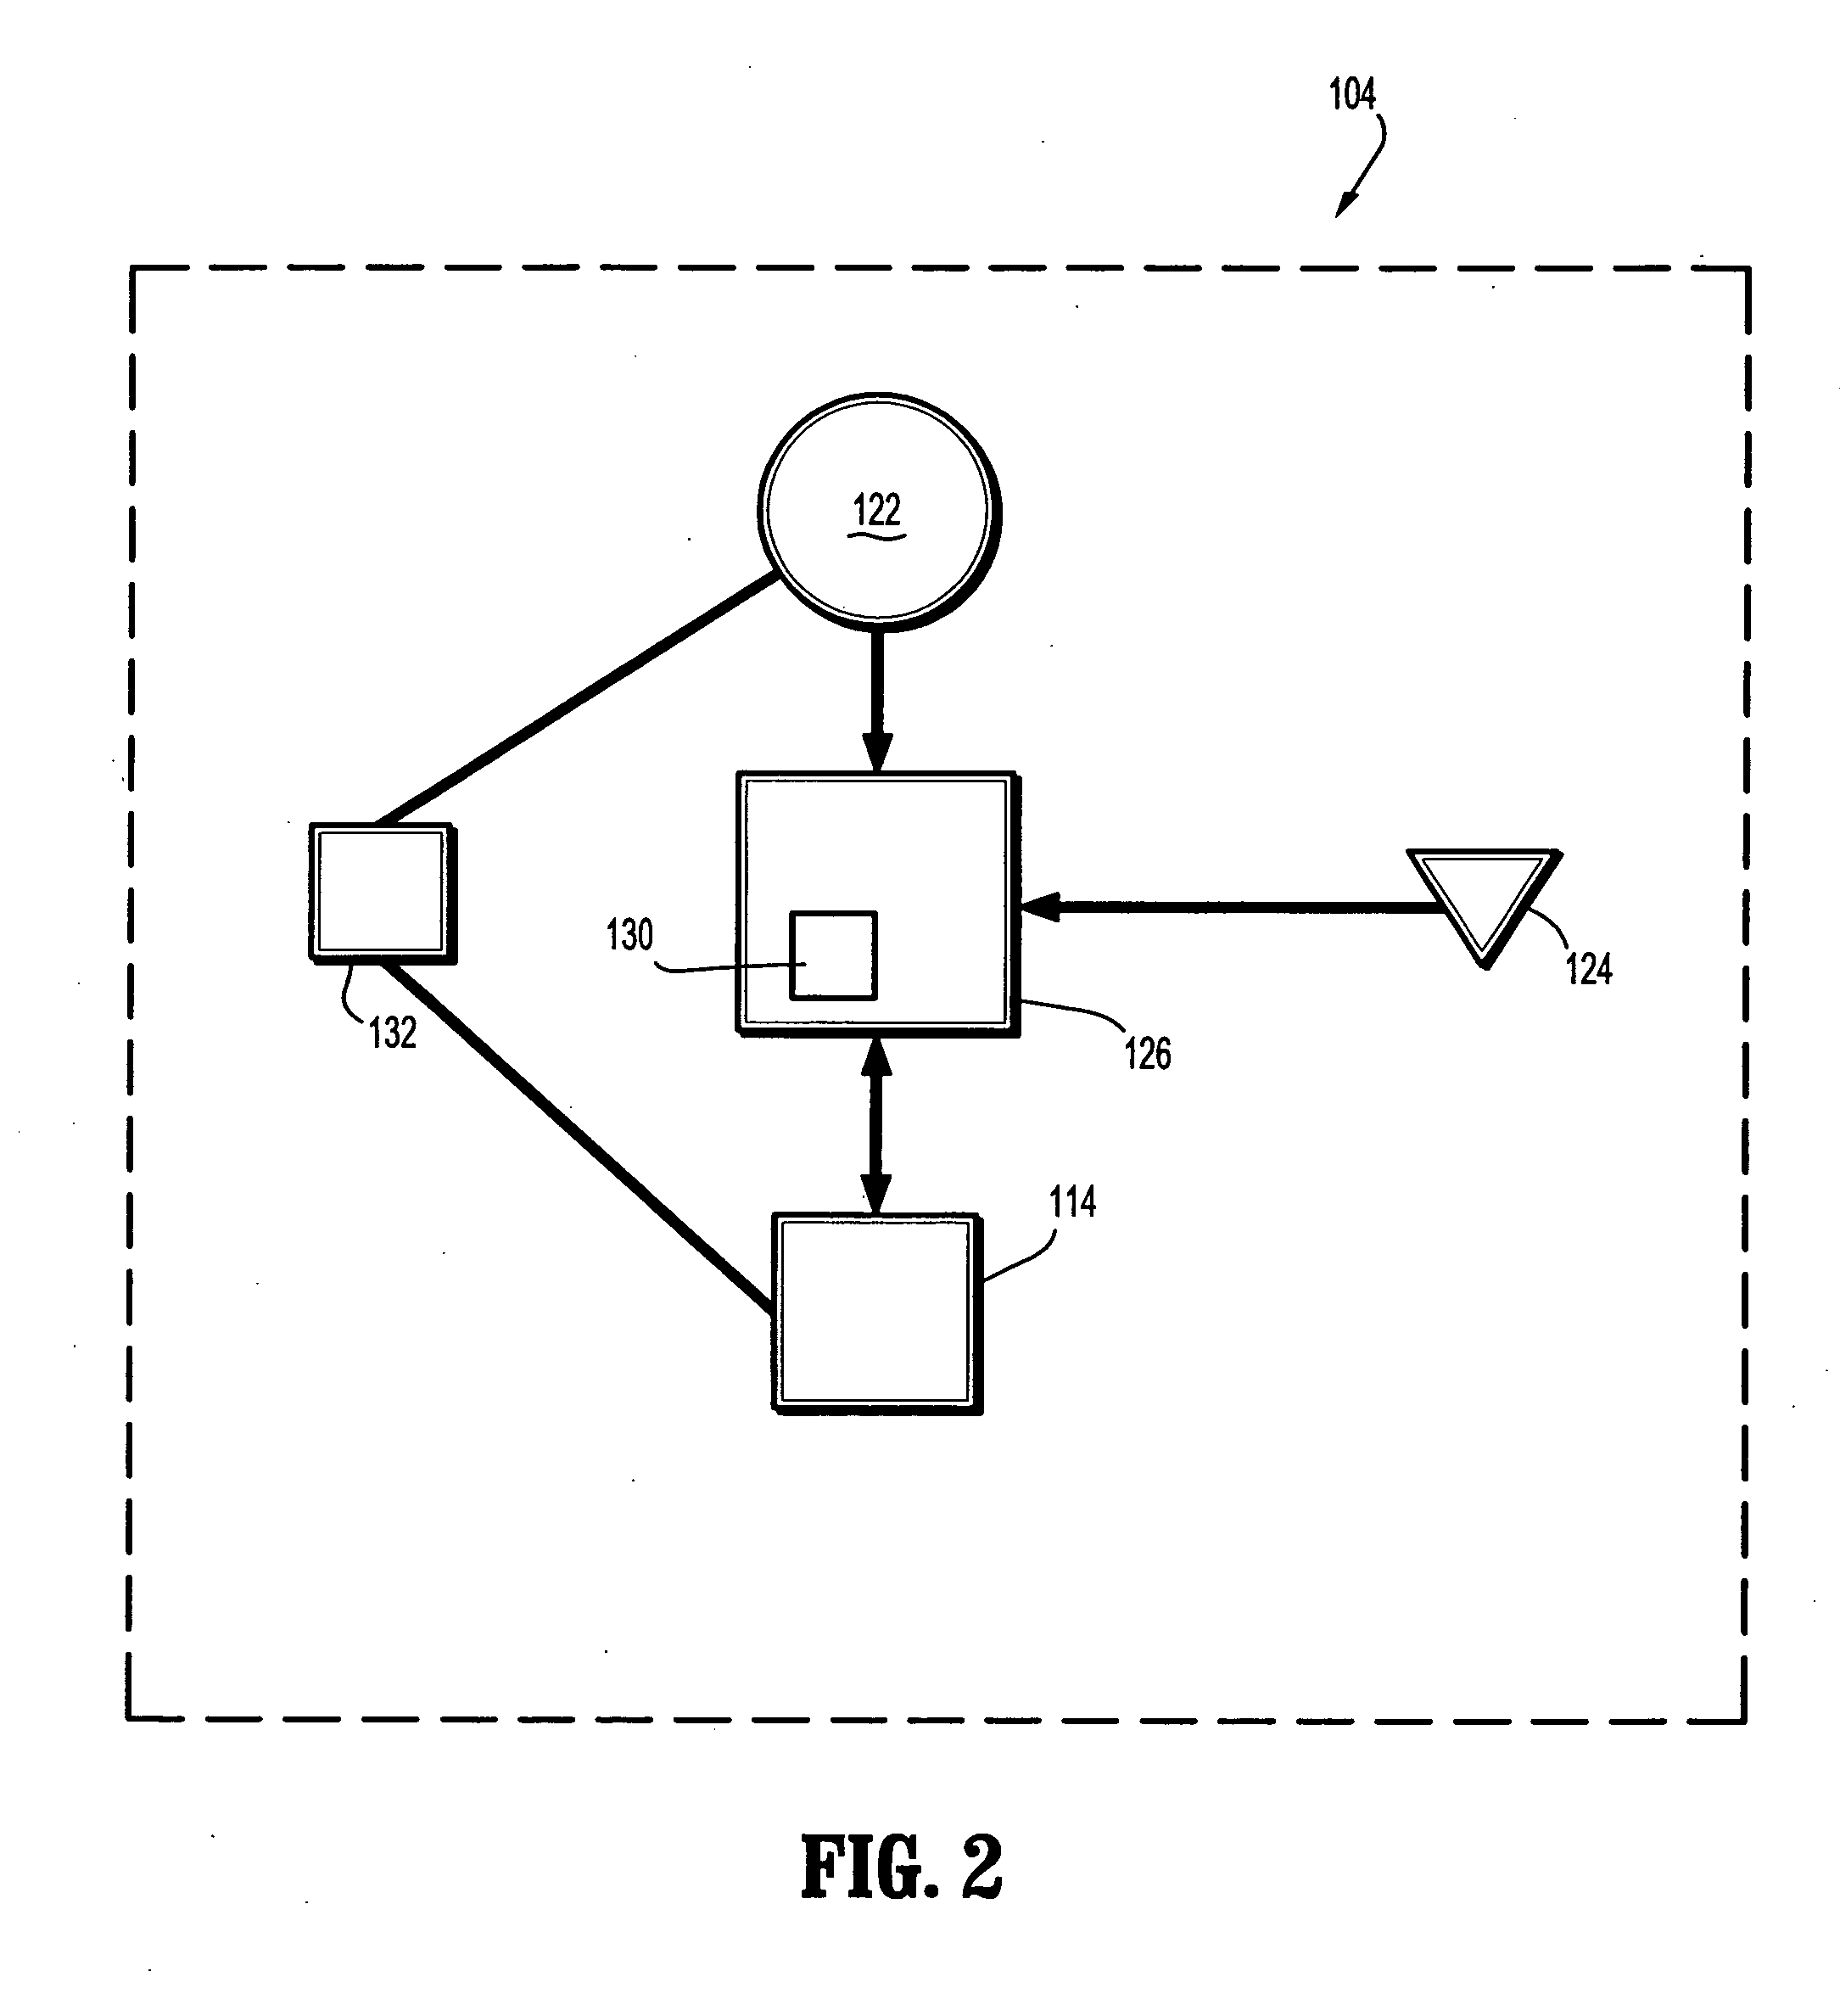 Self contained wound dressing apparatus